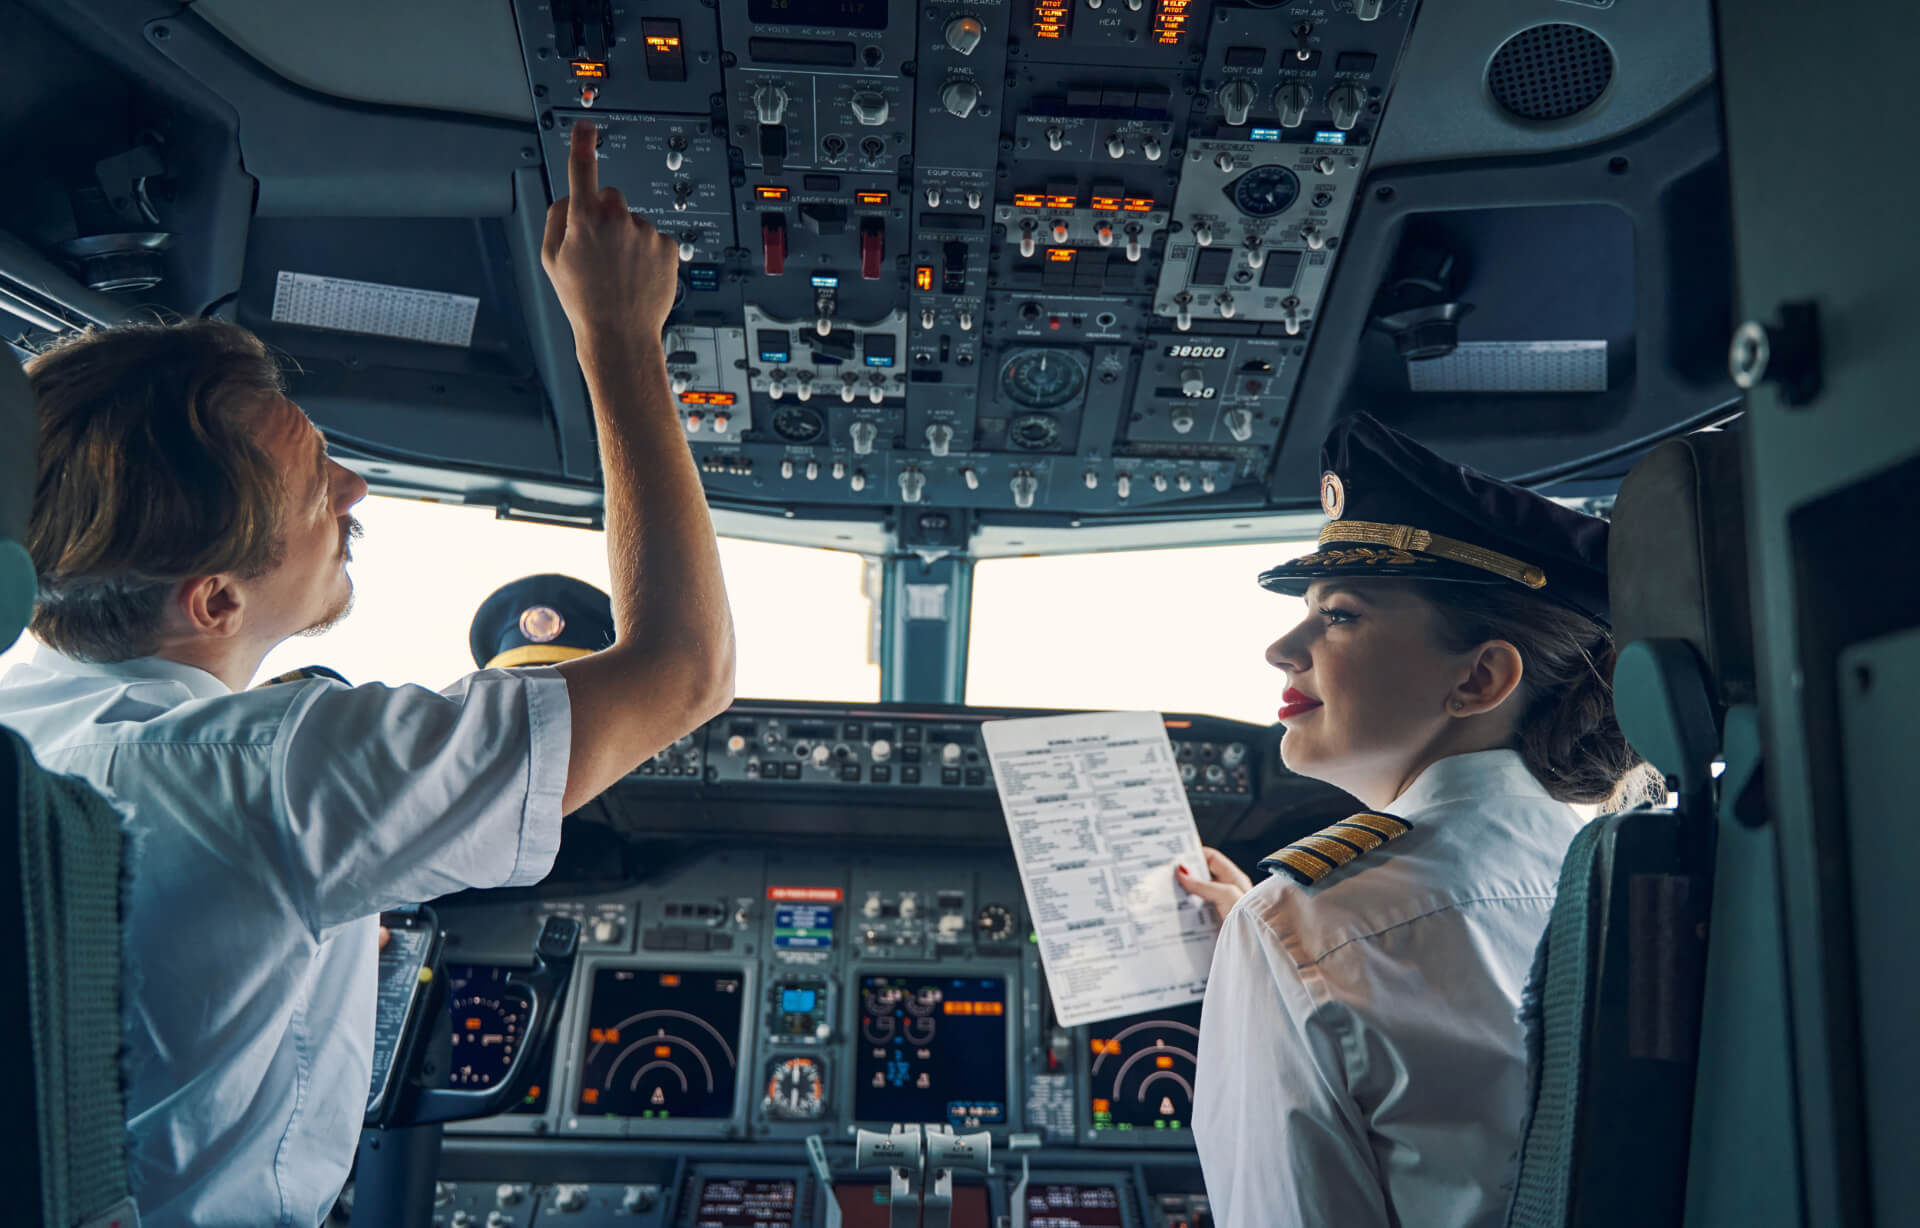 5 Skills You'll Learn in a Commercial Pilot Course